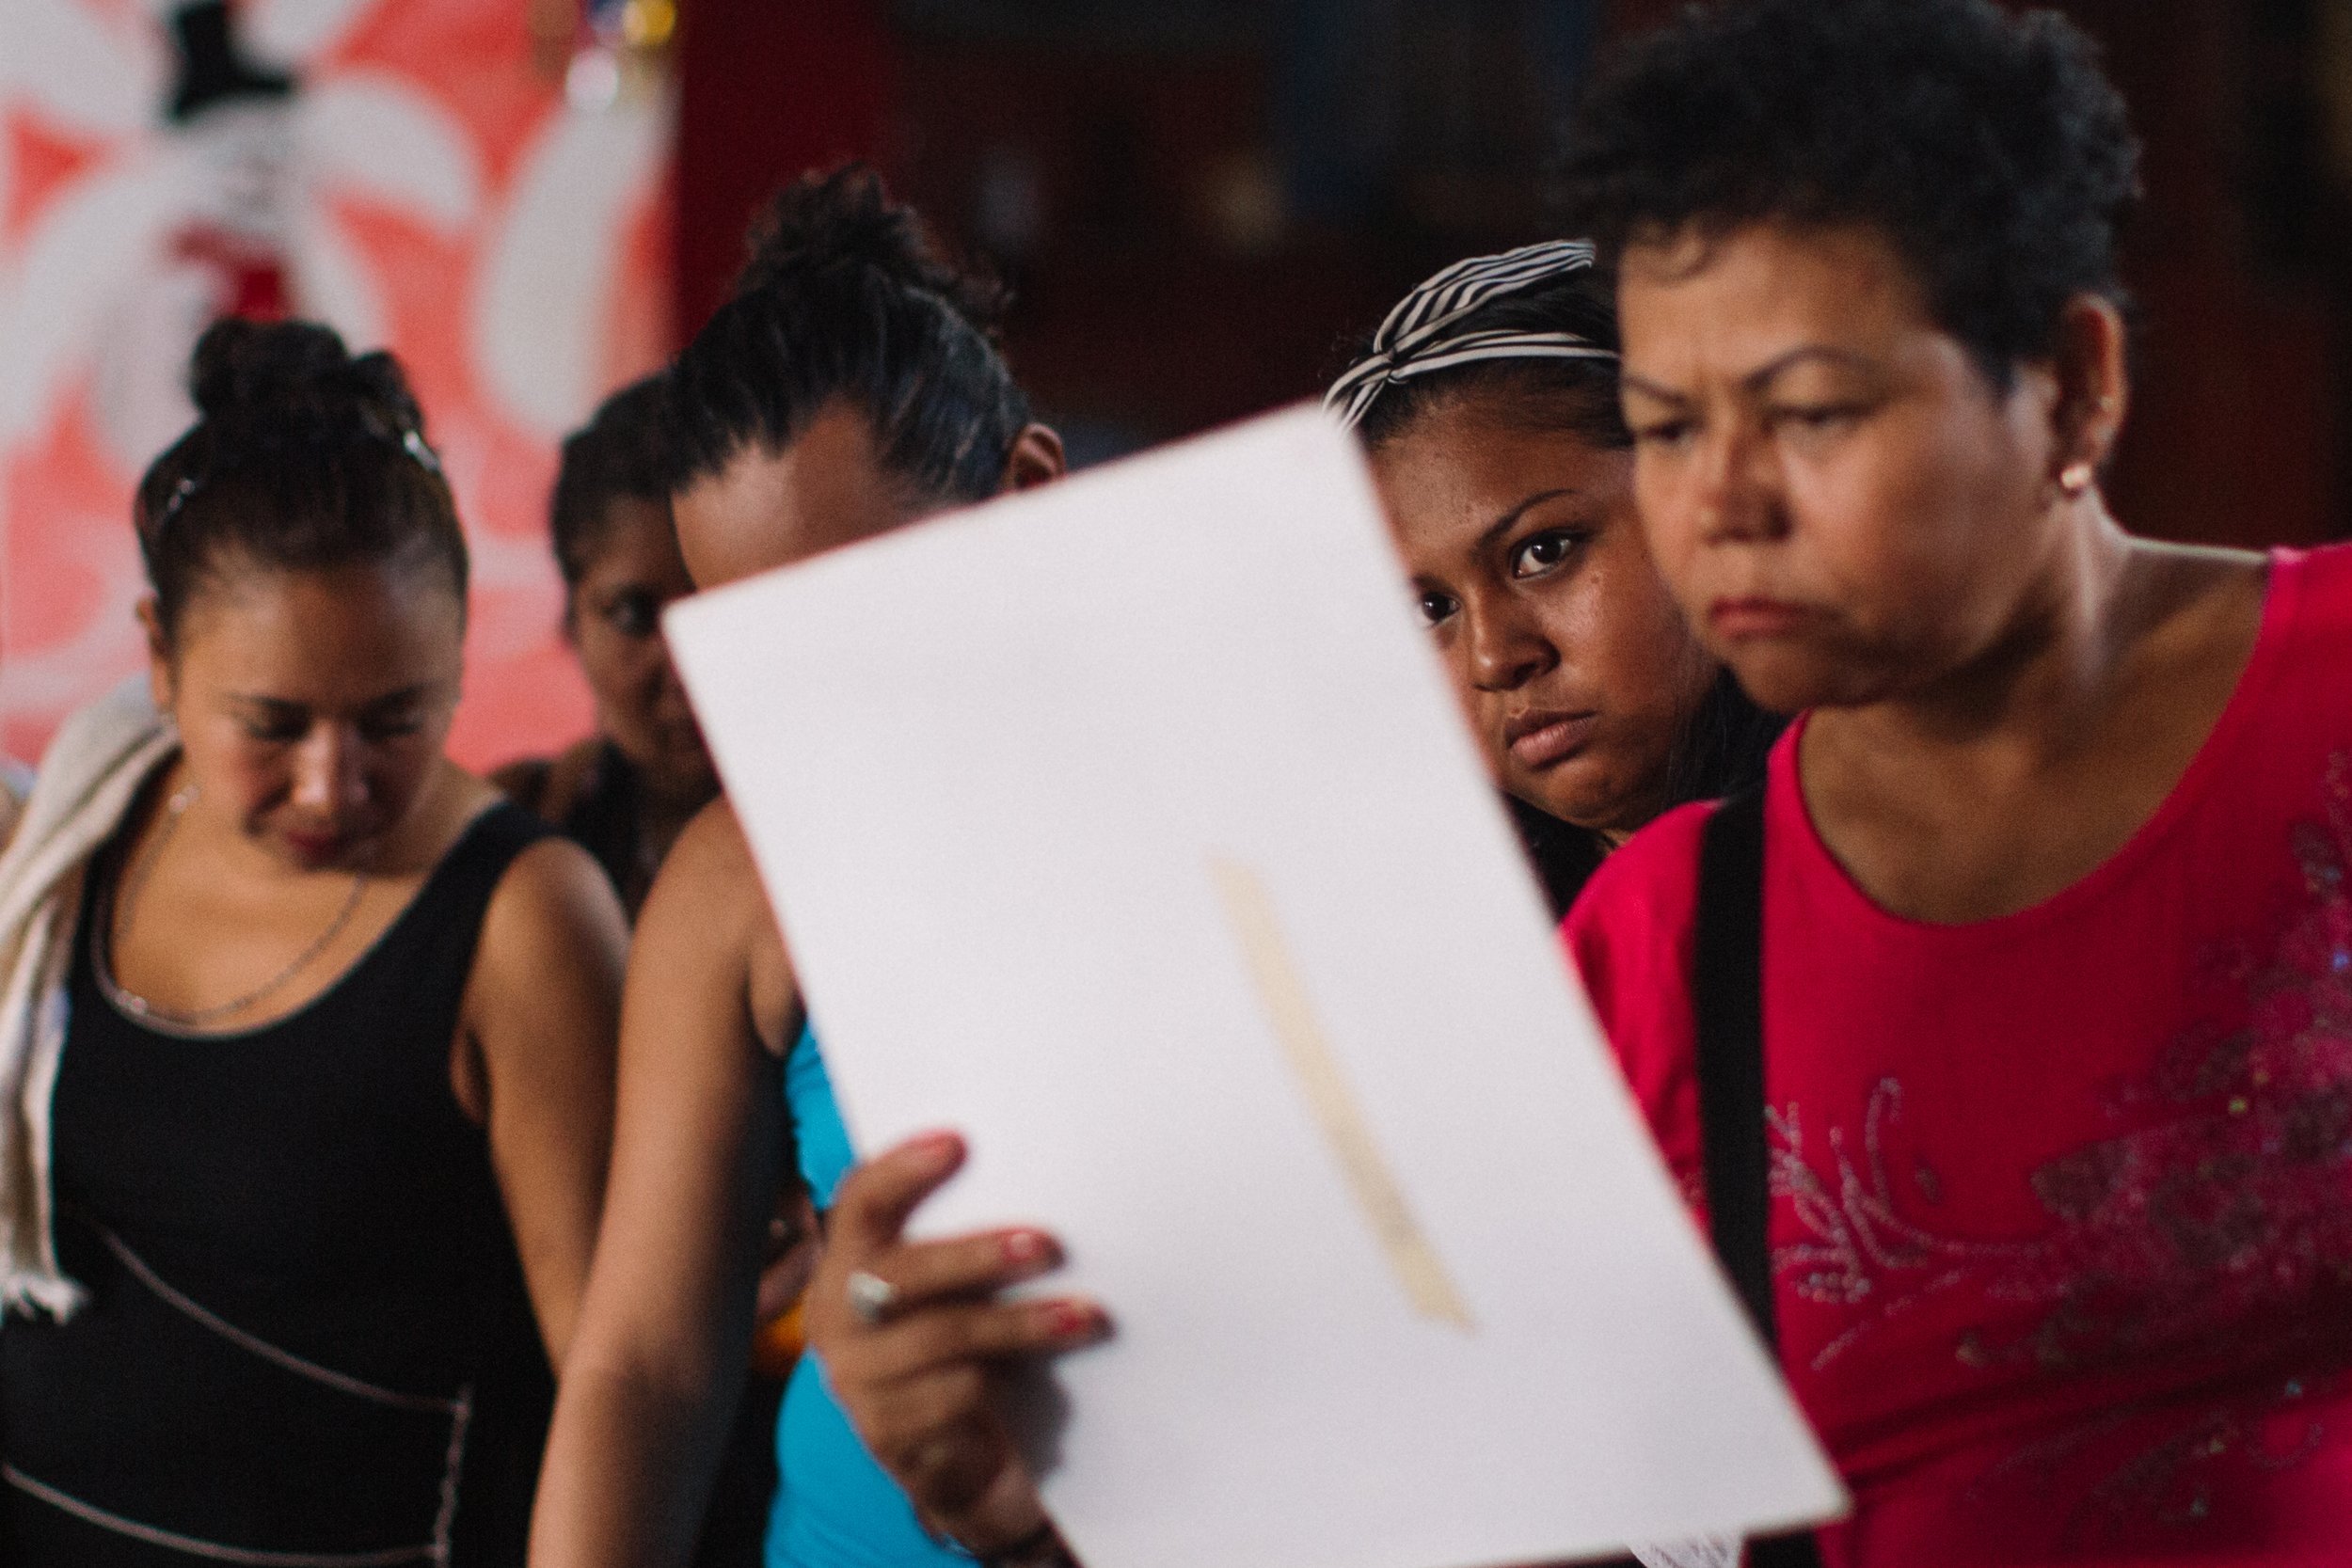  At a popular strip club called El Marinero in Tapachula, Chiapas, Mexico, workers look through photos of their missing loved ones in Tapachula, Chiapas, Mexico. The mothers understand the realities of the migrant journey and the risks that many wome